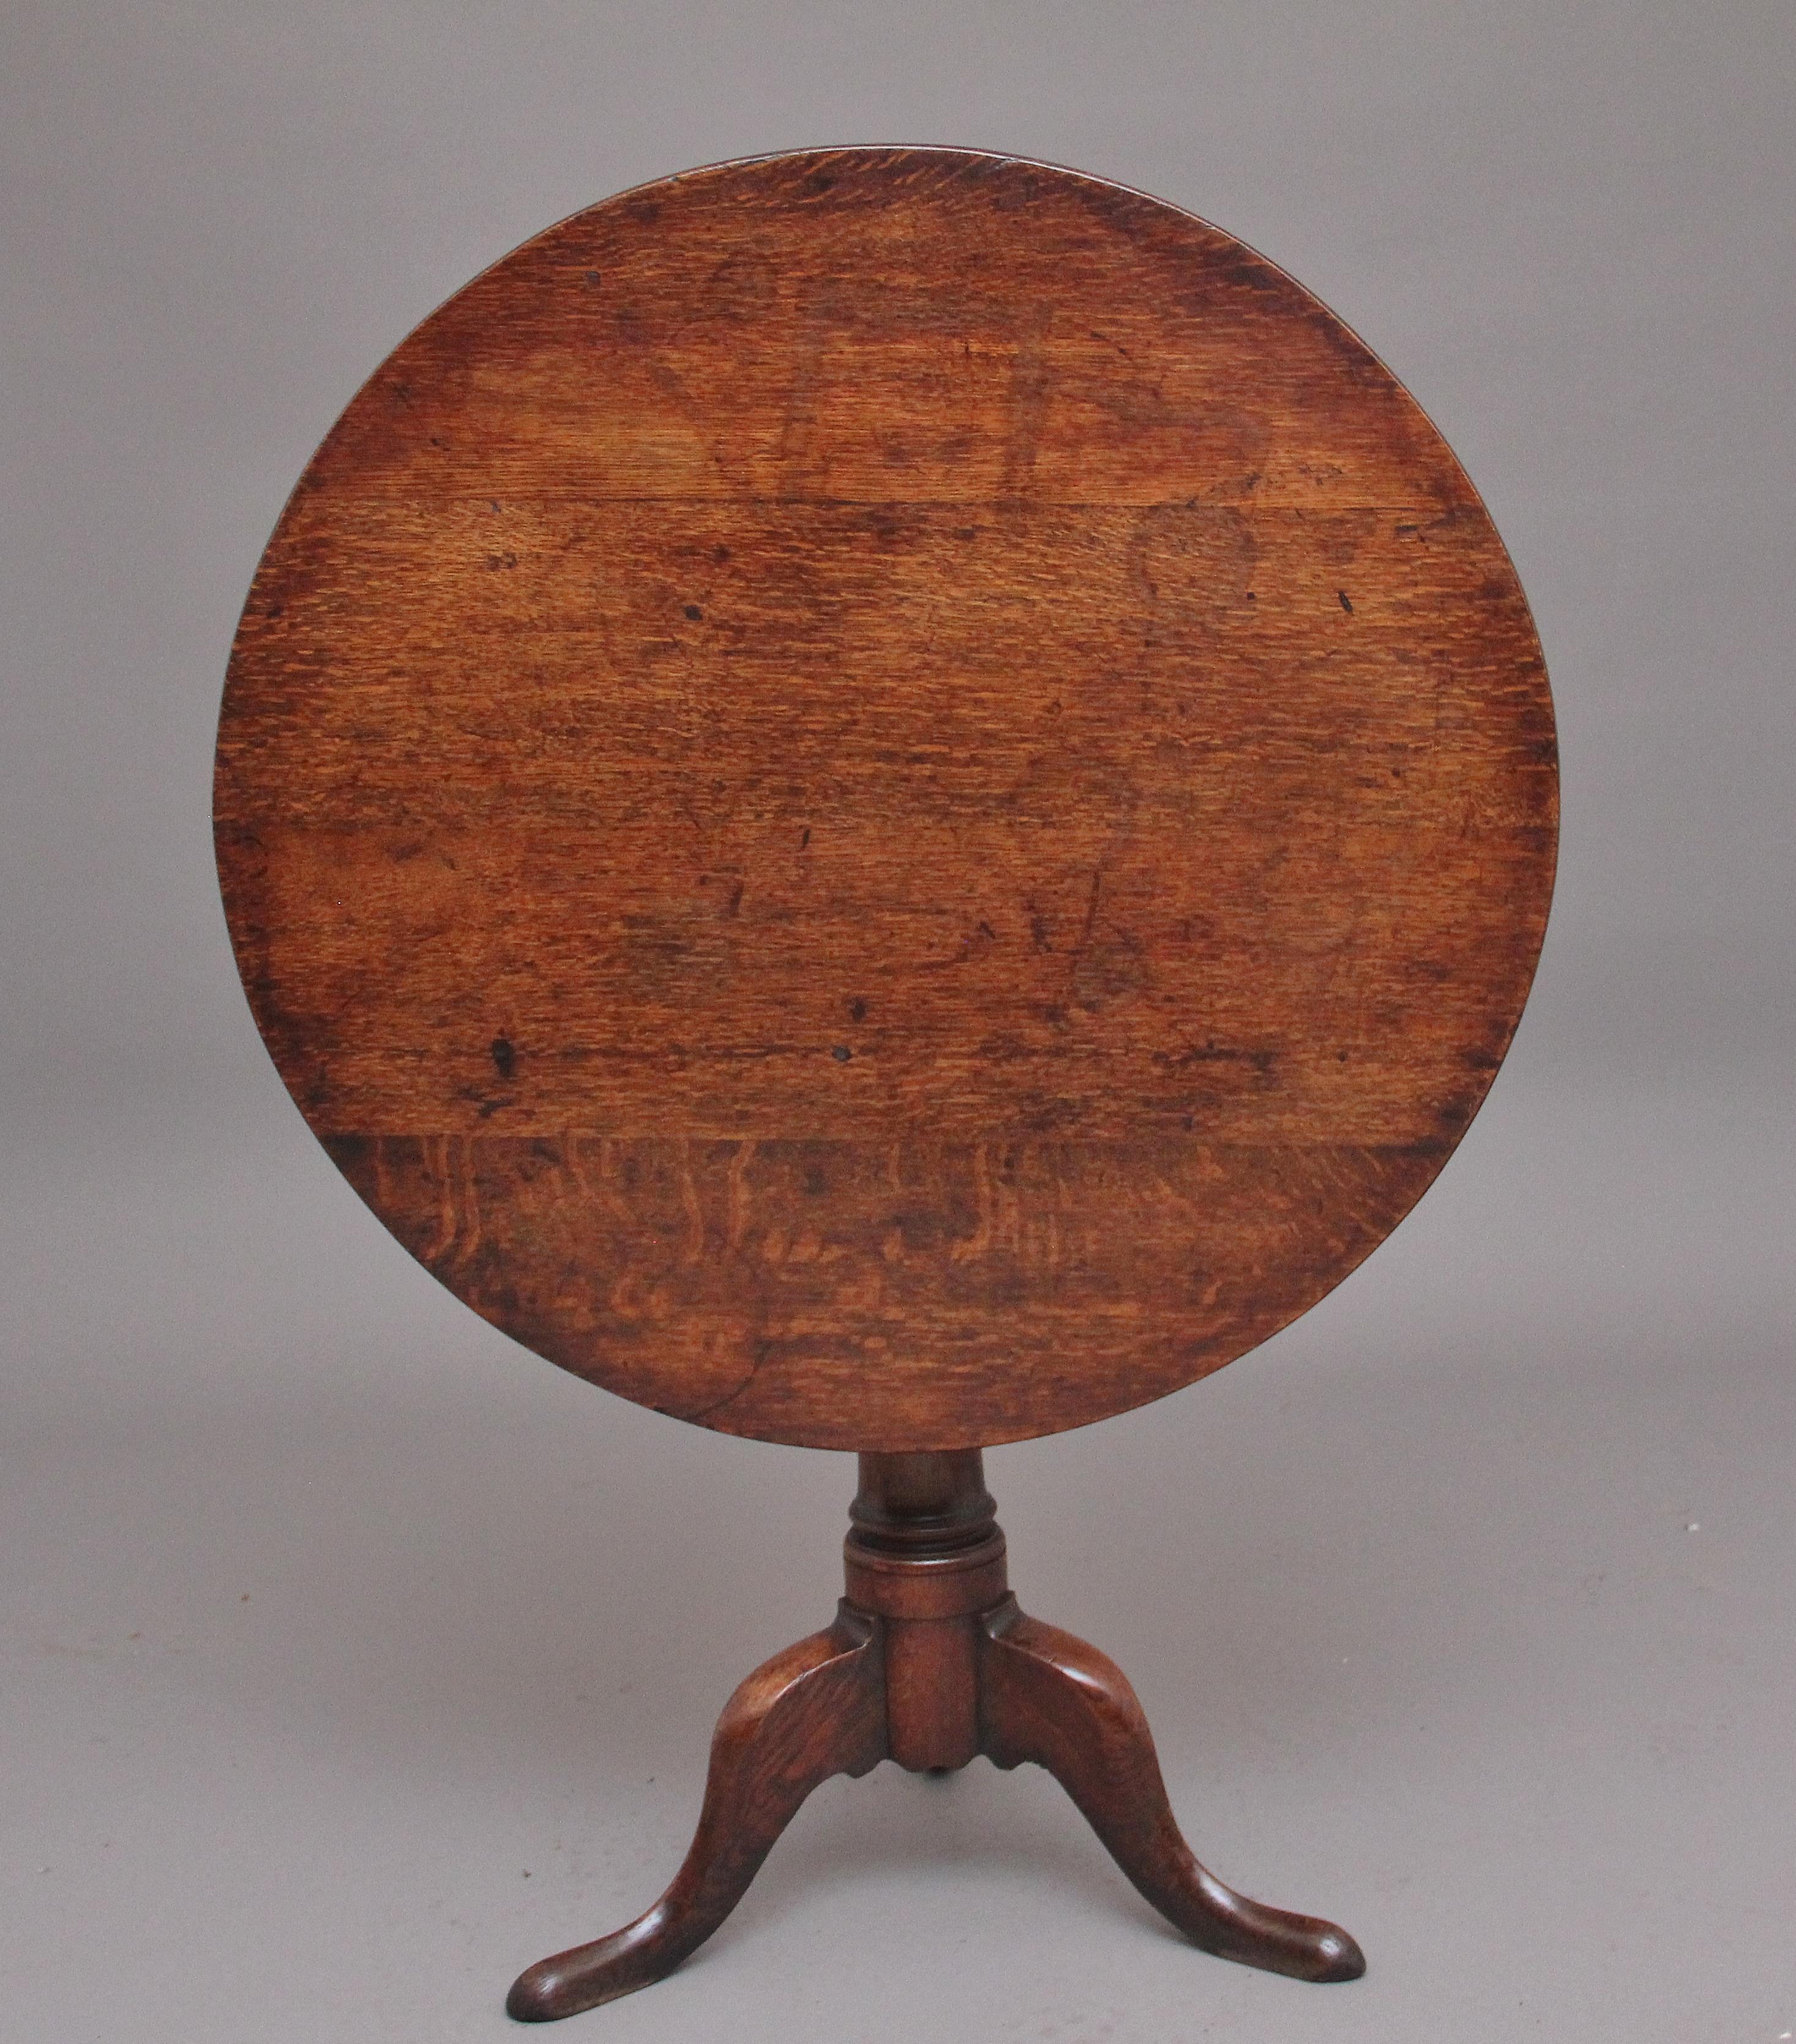 18th Century oak tripod table, having a wonderful figured circular top which sits on a birdcage mount so you can turn the top without turning the base, supported on a turned column terminating with three slender shaped legs. Lovely warm oak colour